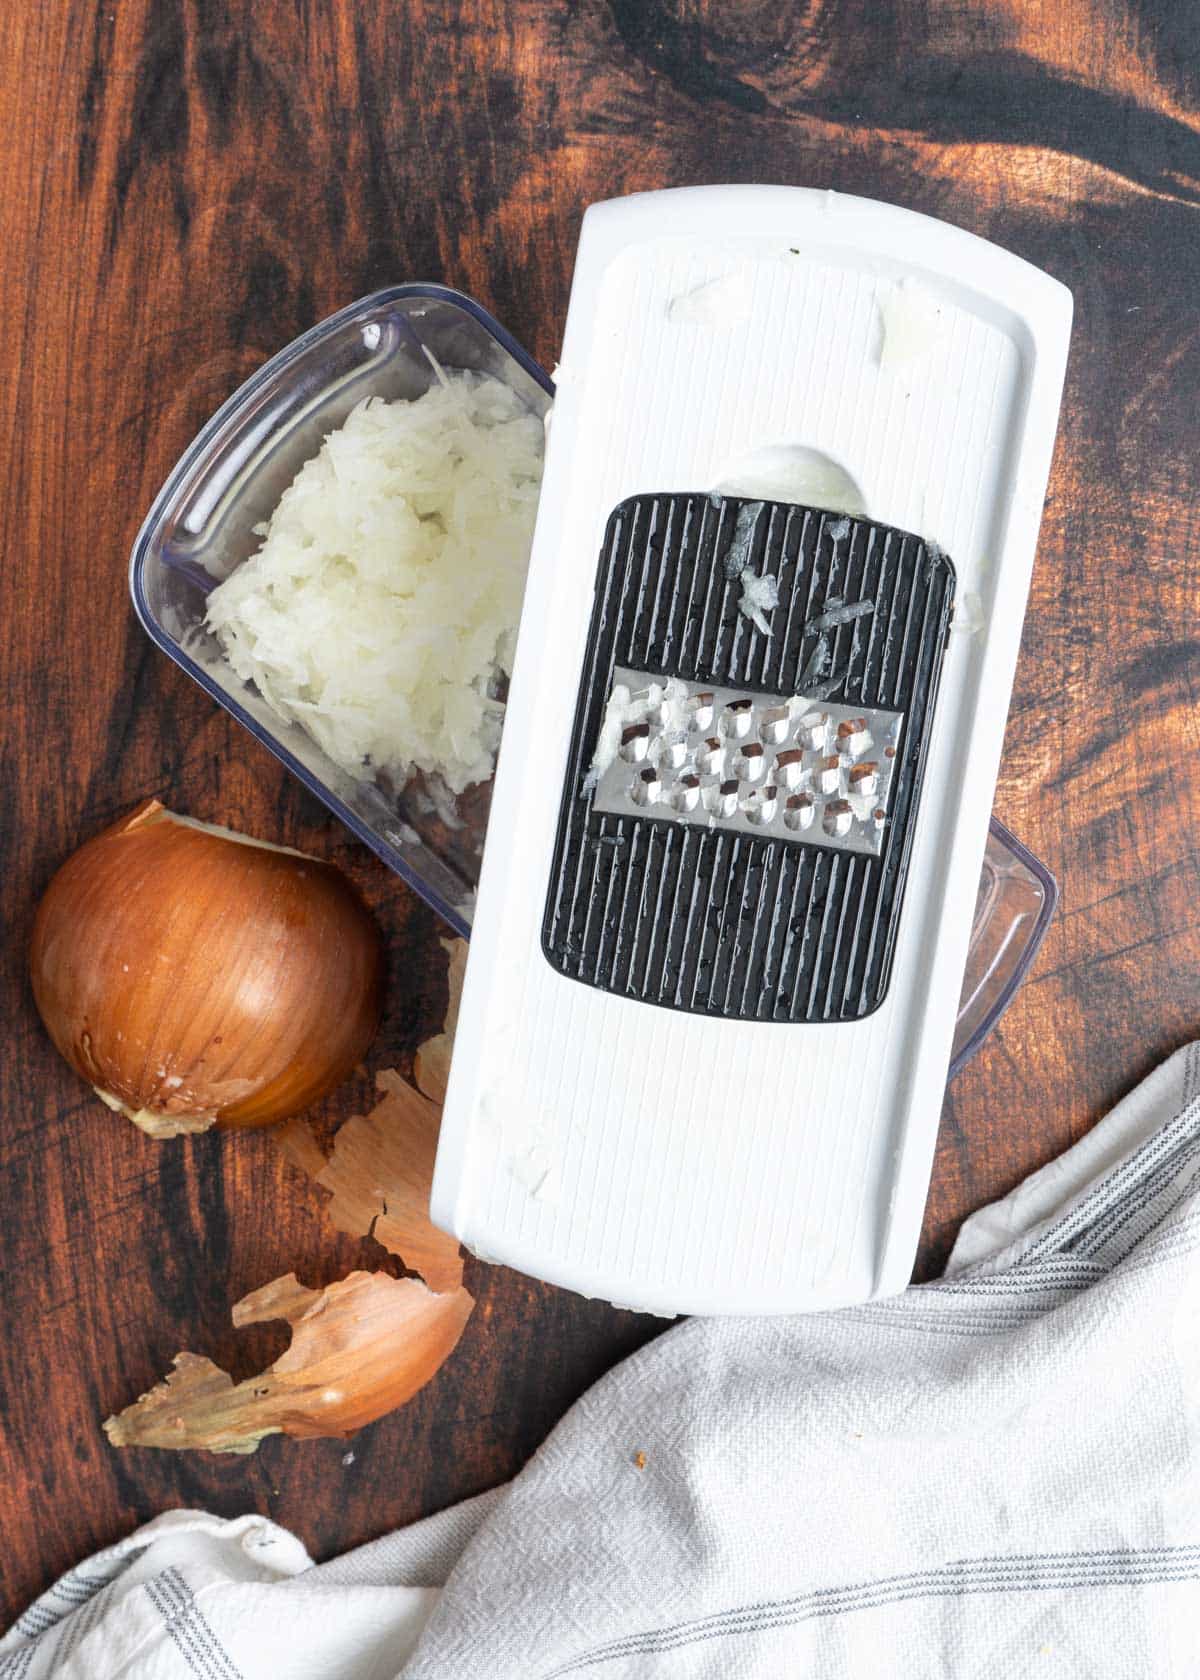 Grated onion and a box grater.